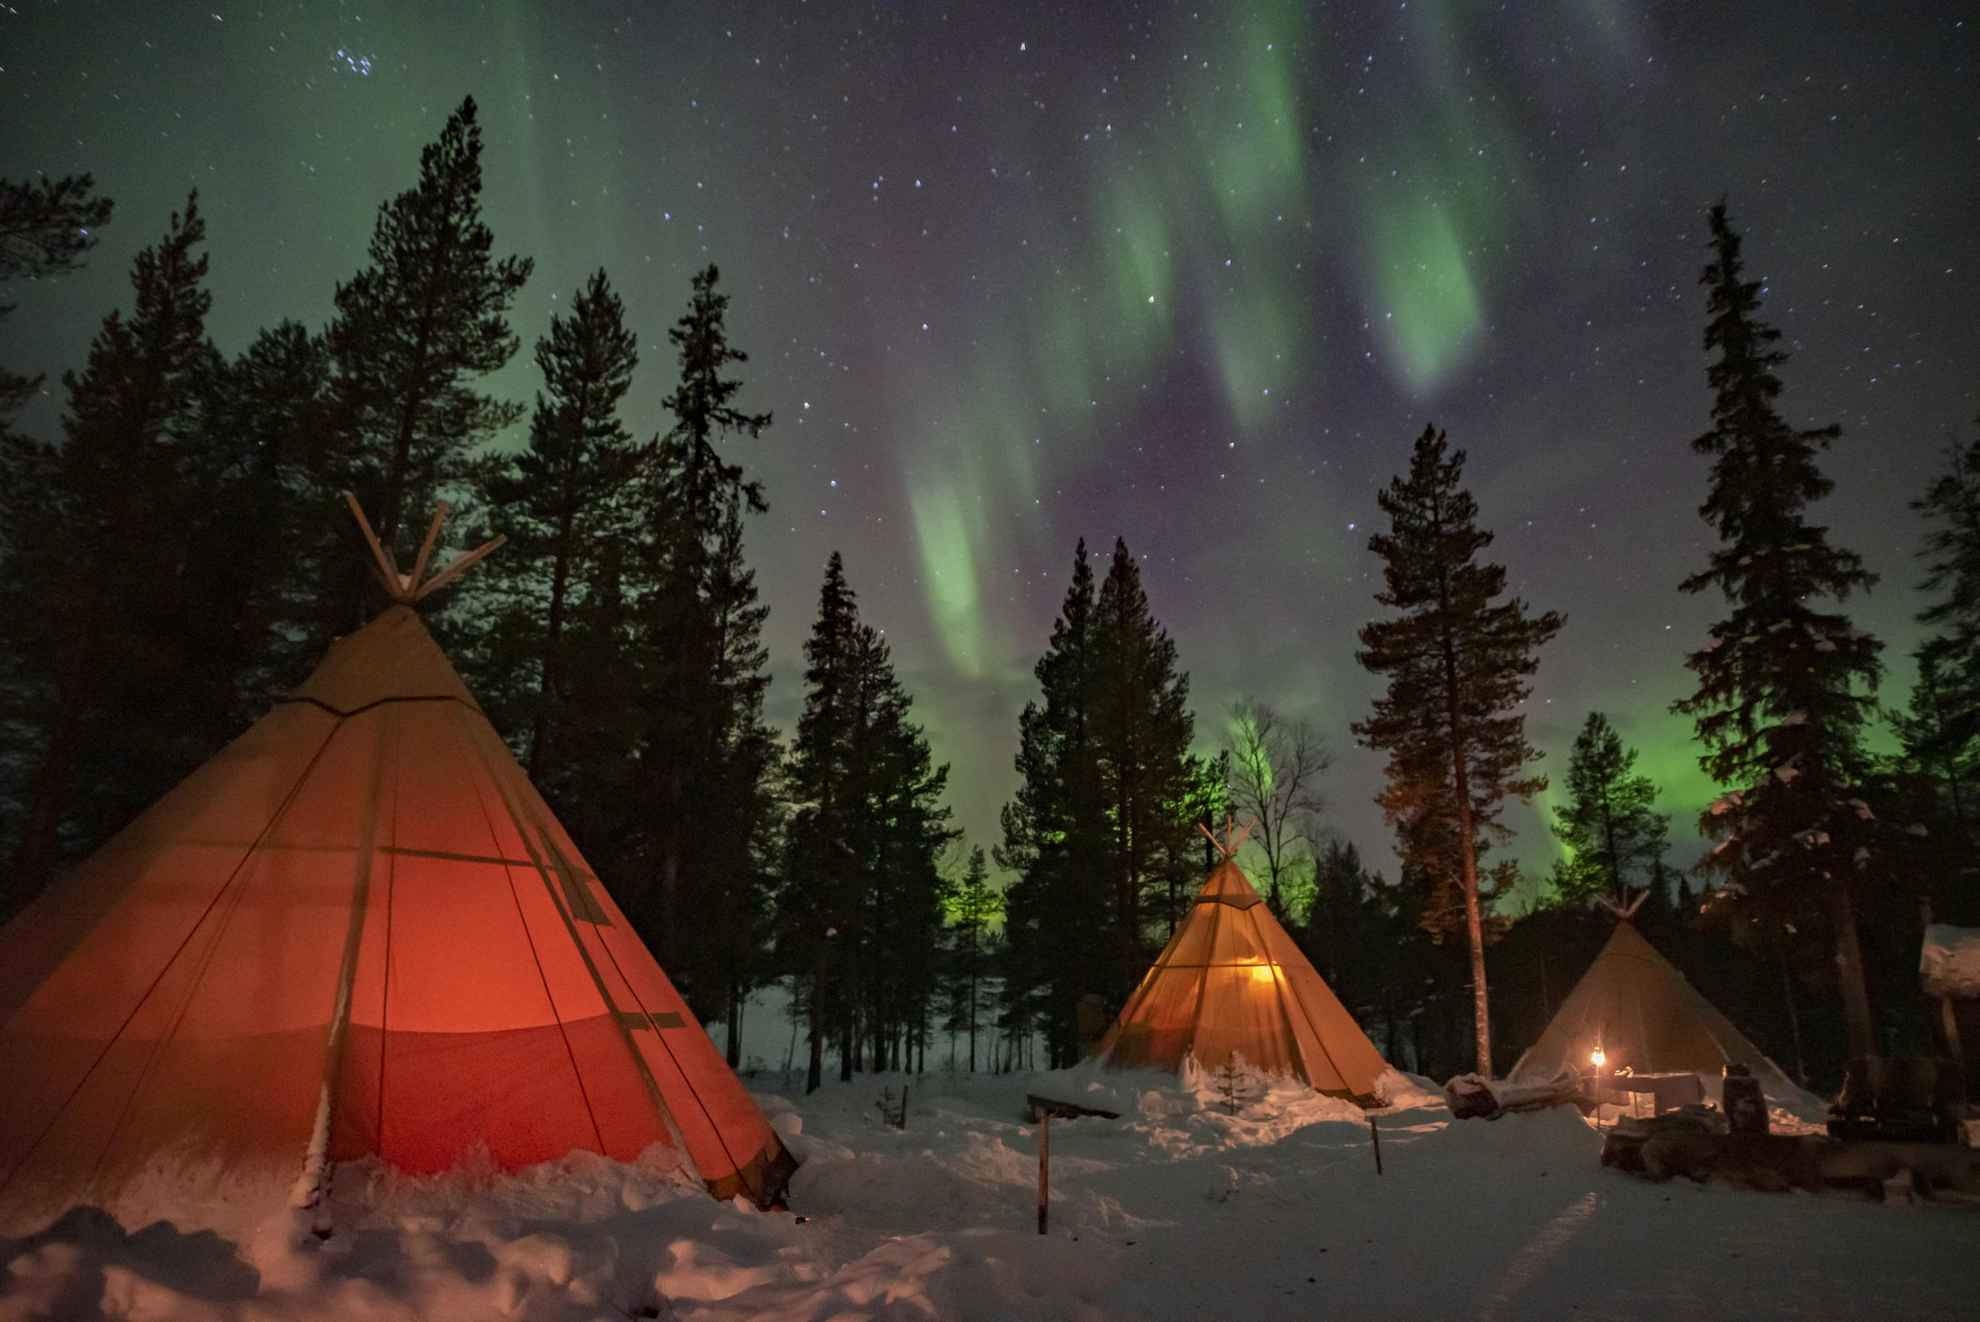 Northern lights in the sky above the trees and Lavvu tents.